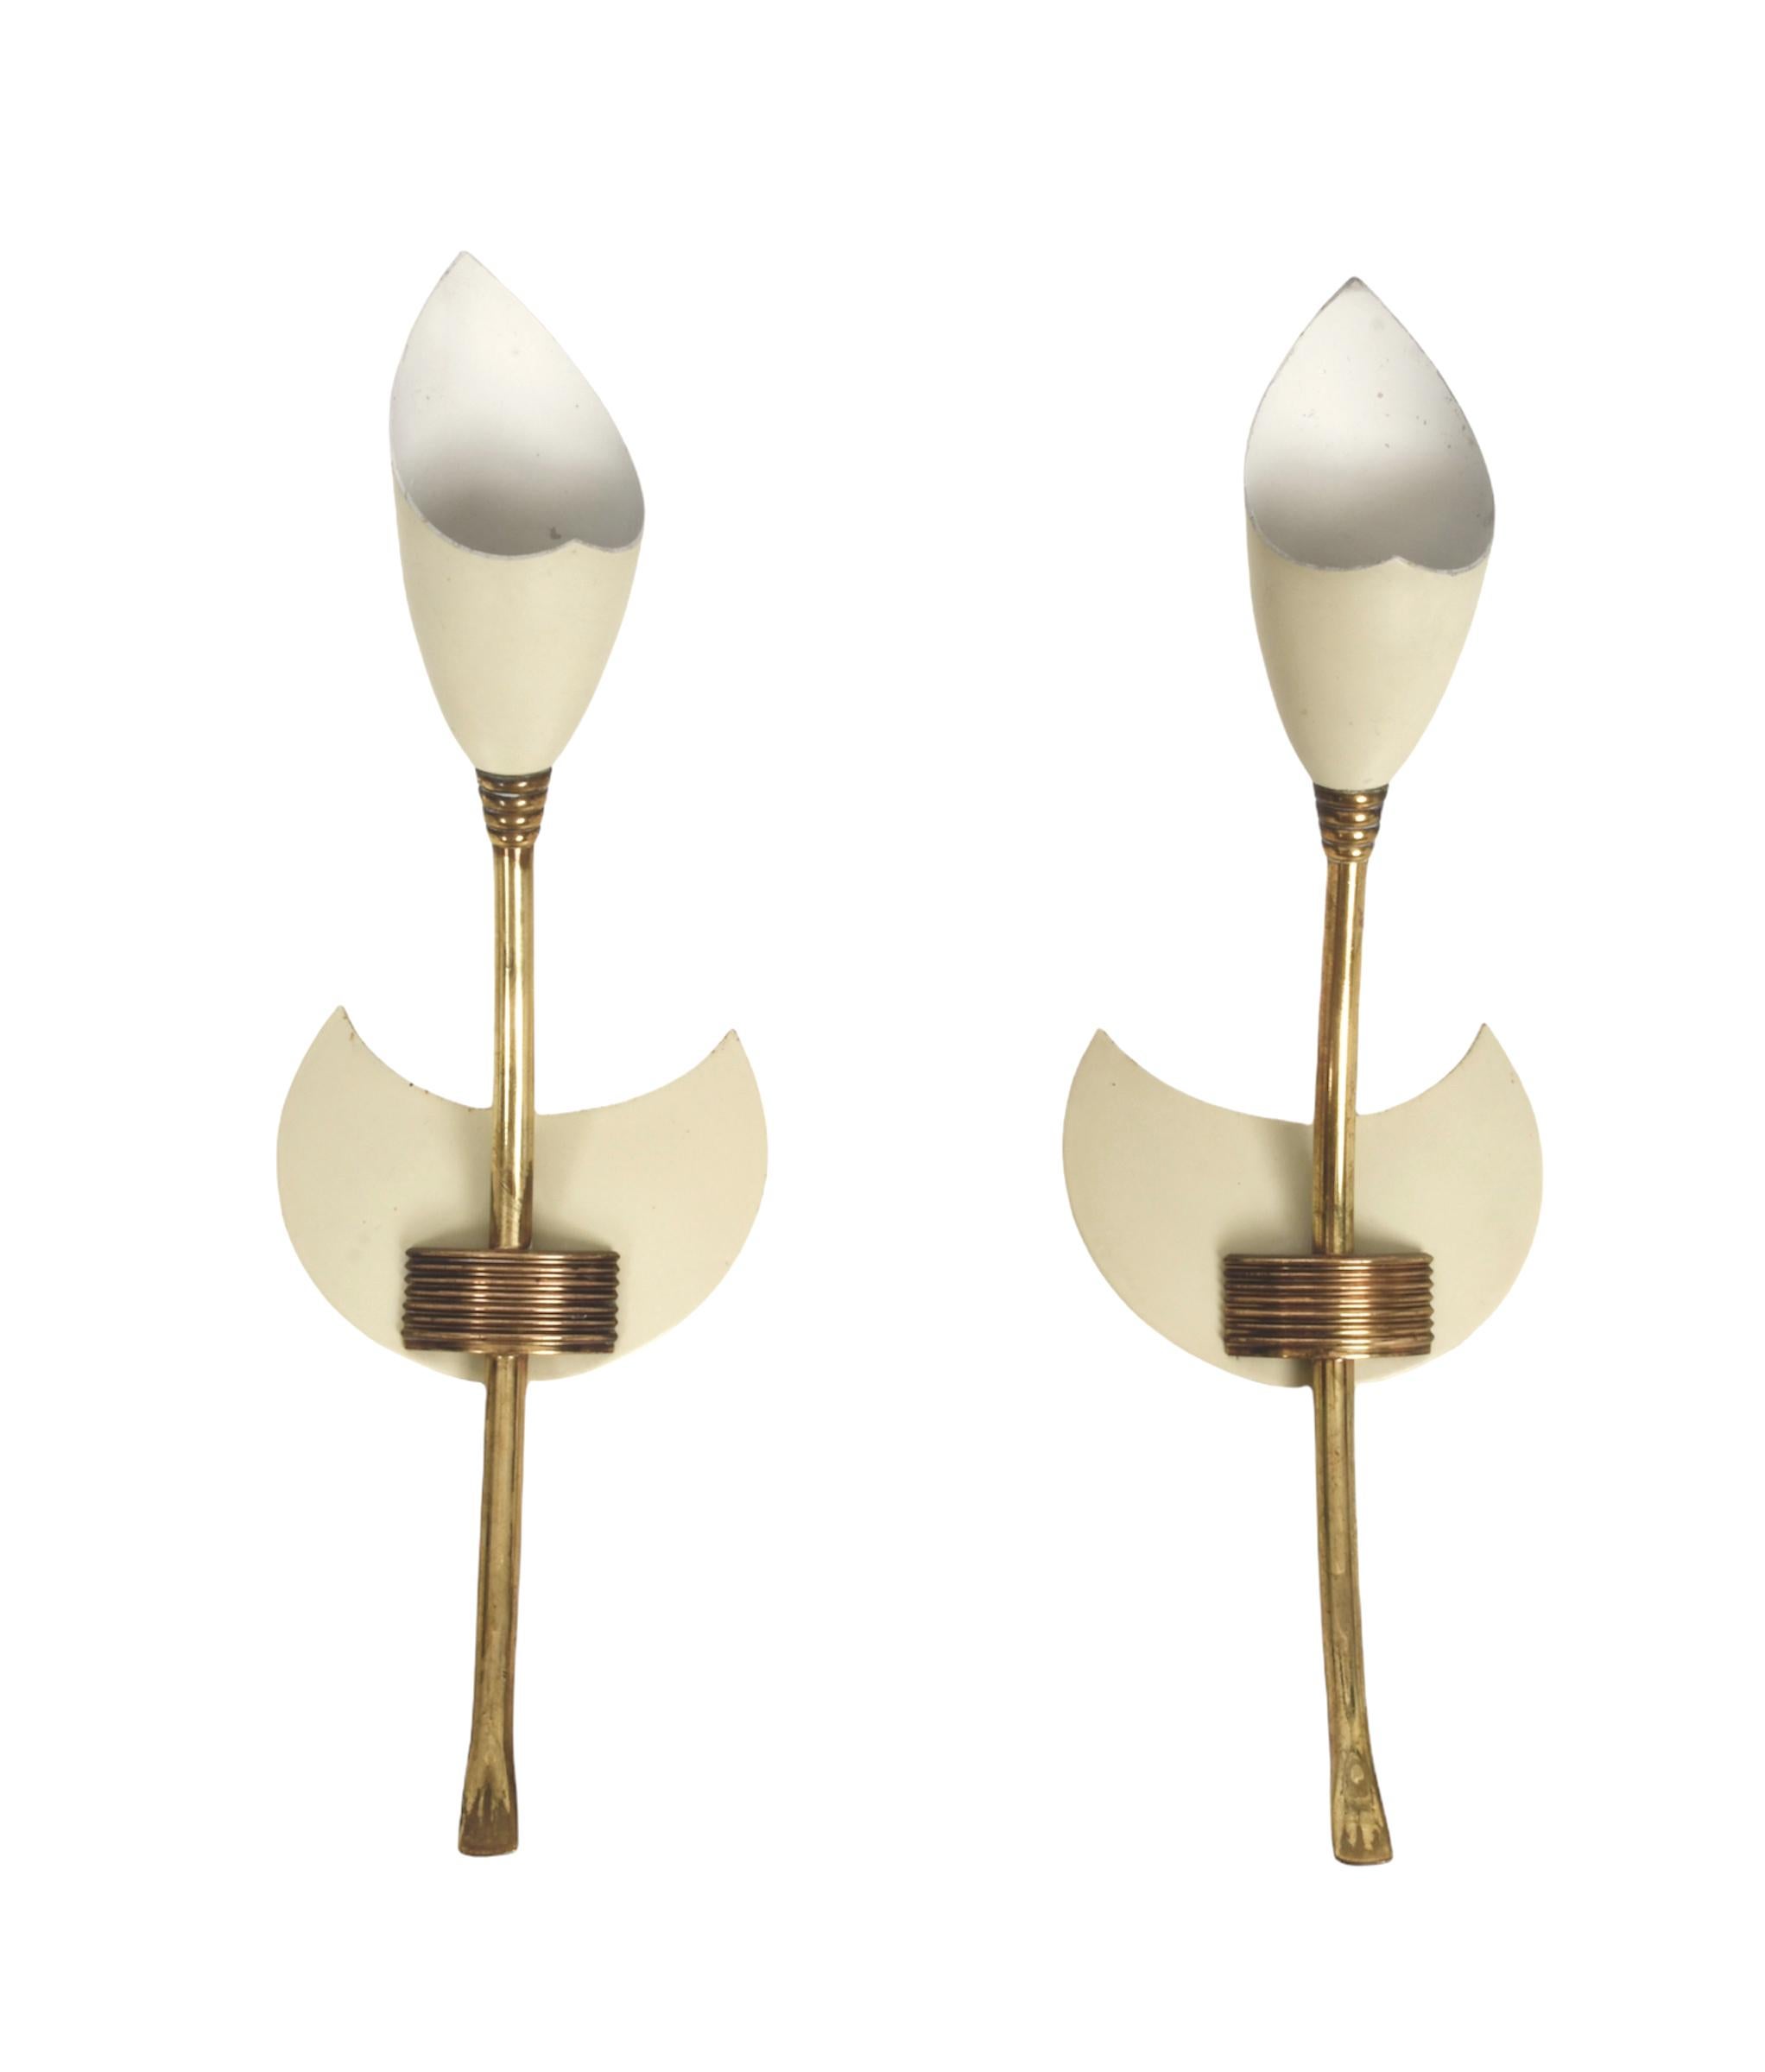 Mid-20th Century Pair of GCME Midcentury Brass and Enamelled Aluminum Italian Tulip Sconces 1950s For Sale